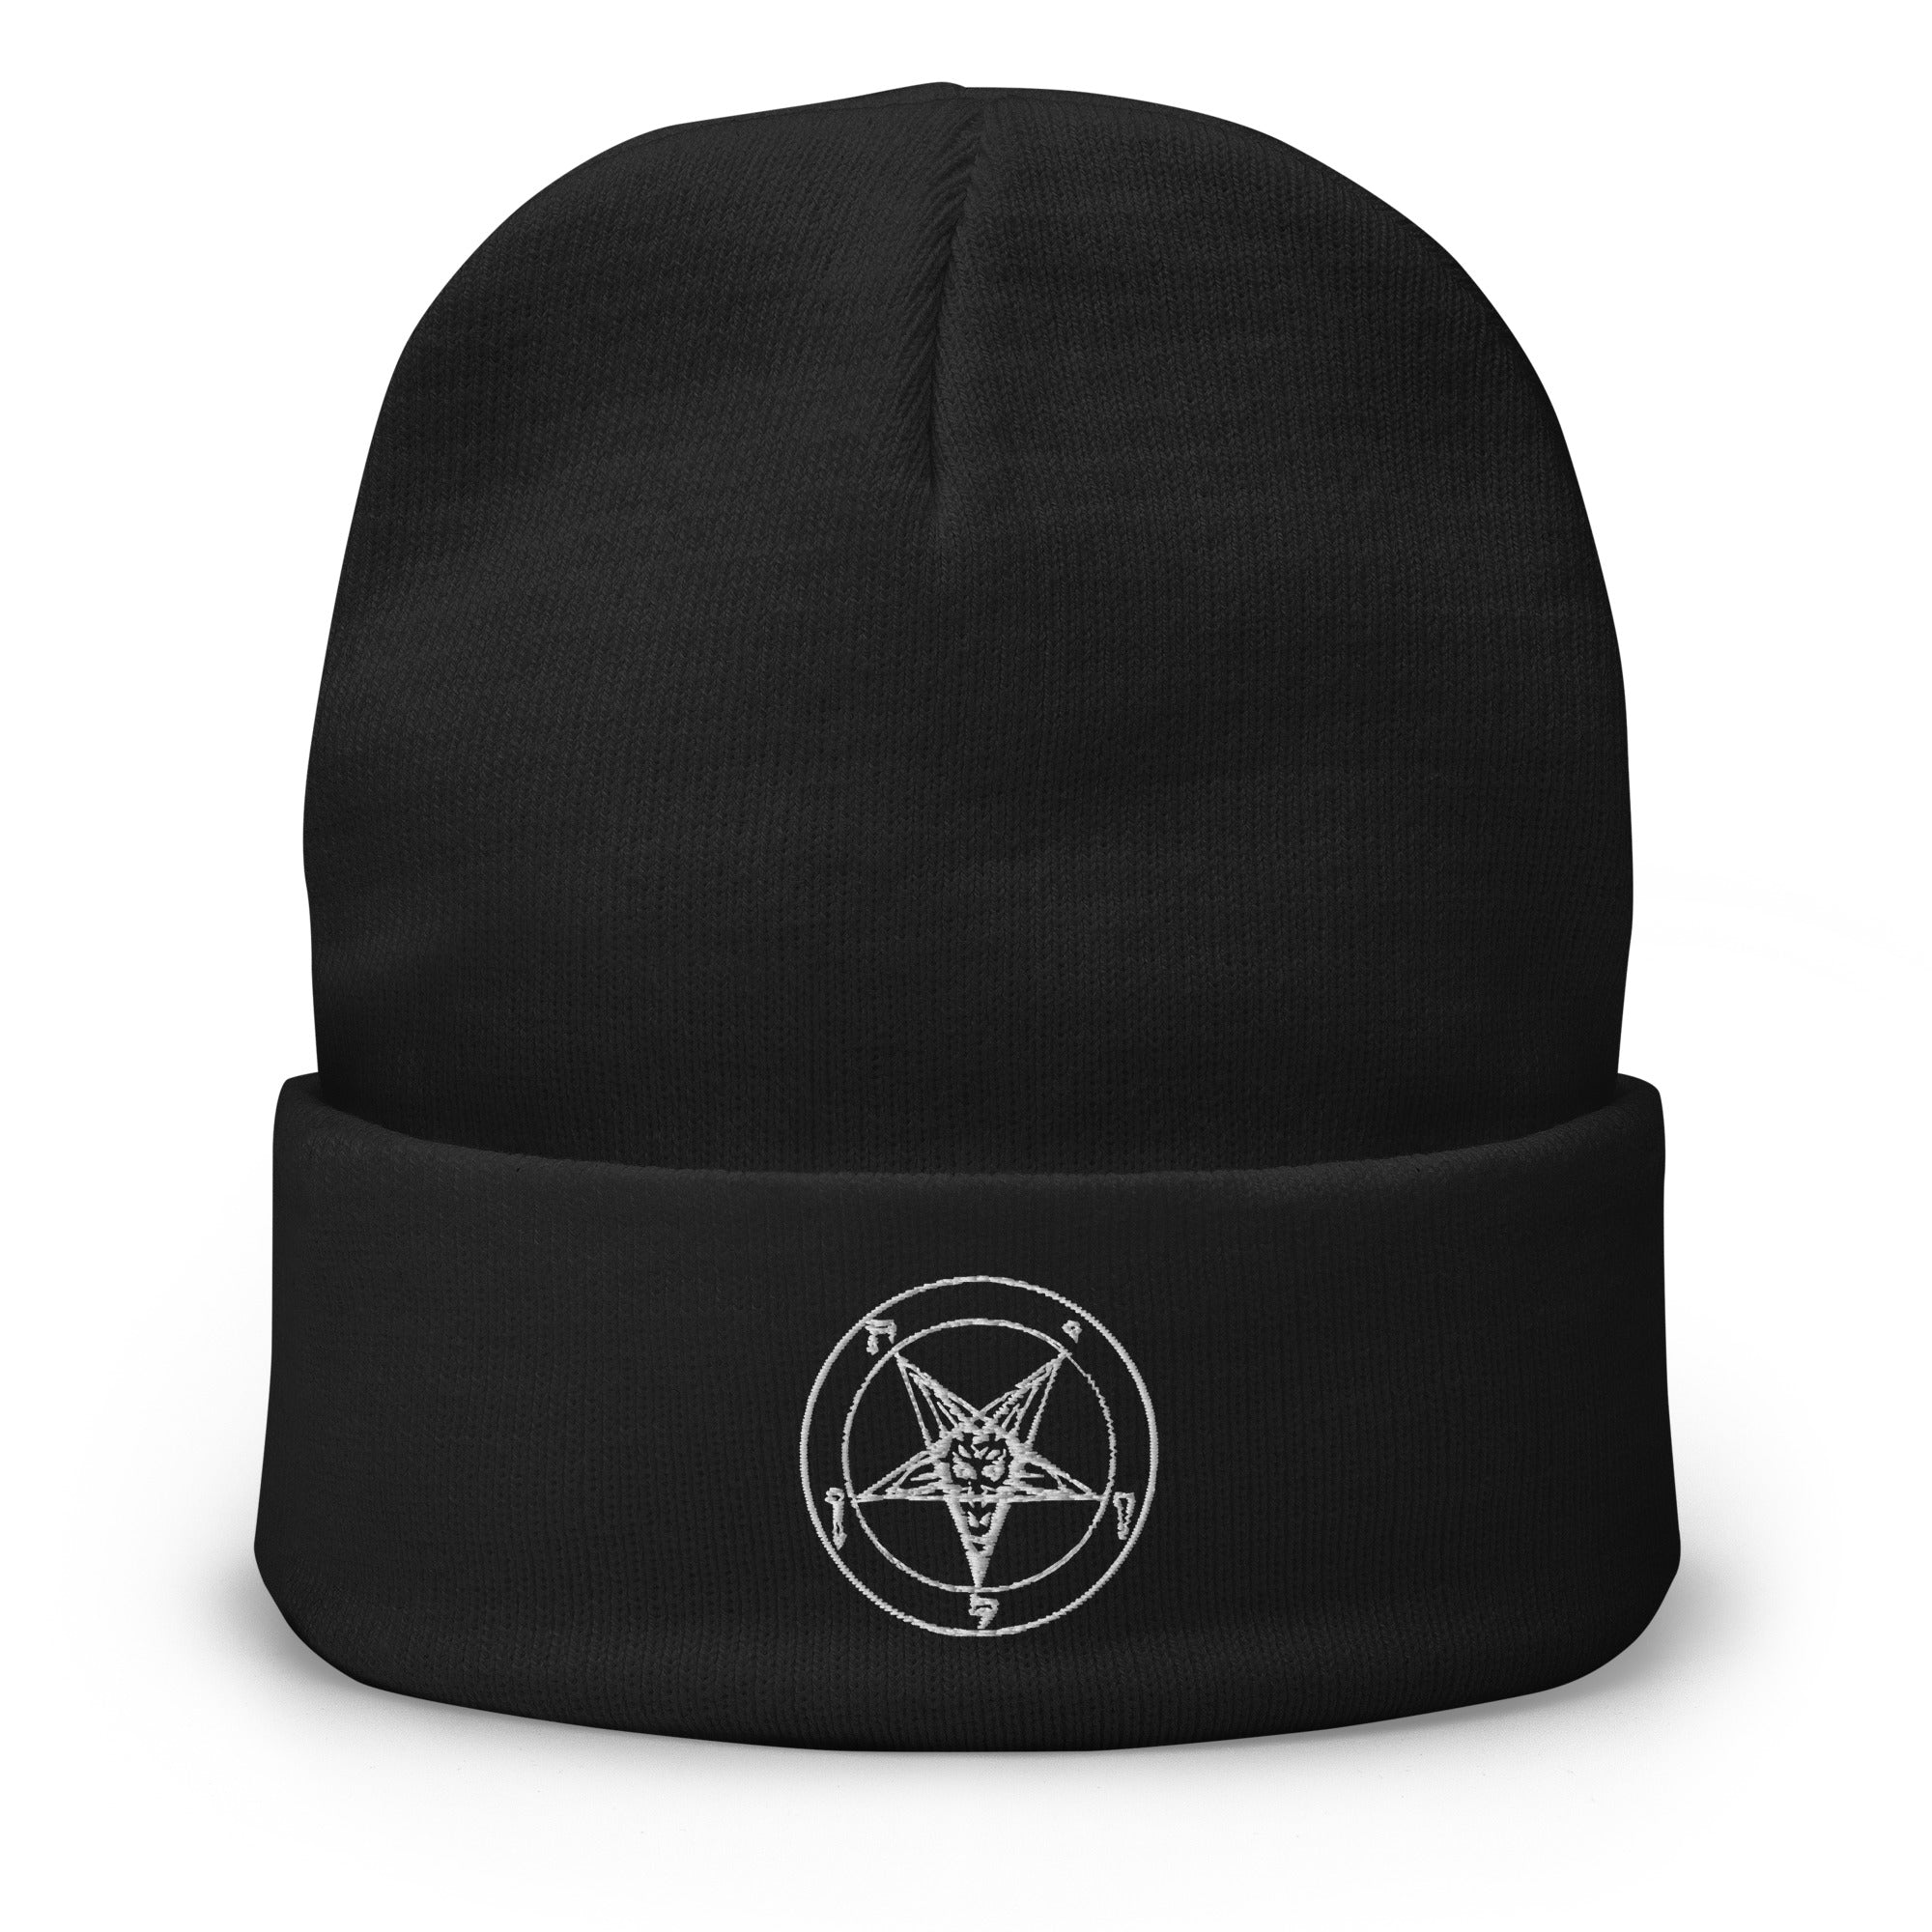 White Sigil of Baphomet Occult Symbol Embroidered Cuff Beanie - Edge of Life Designs